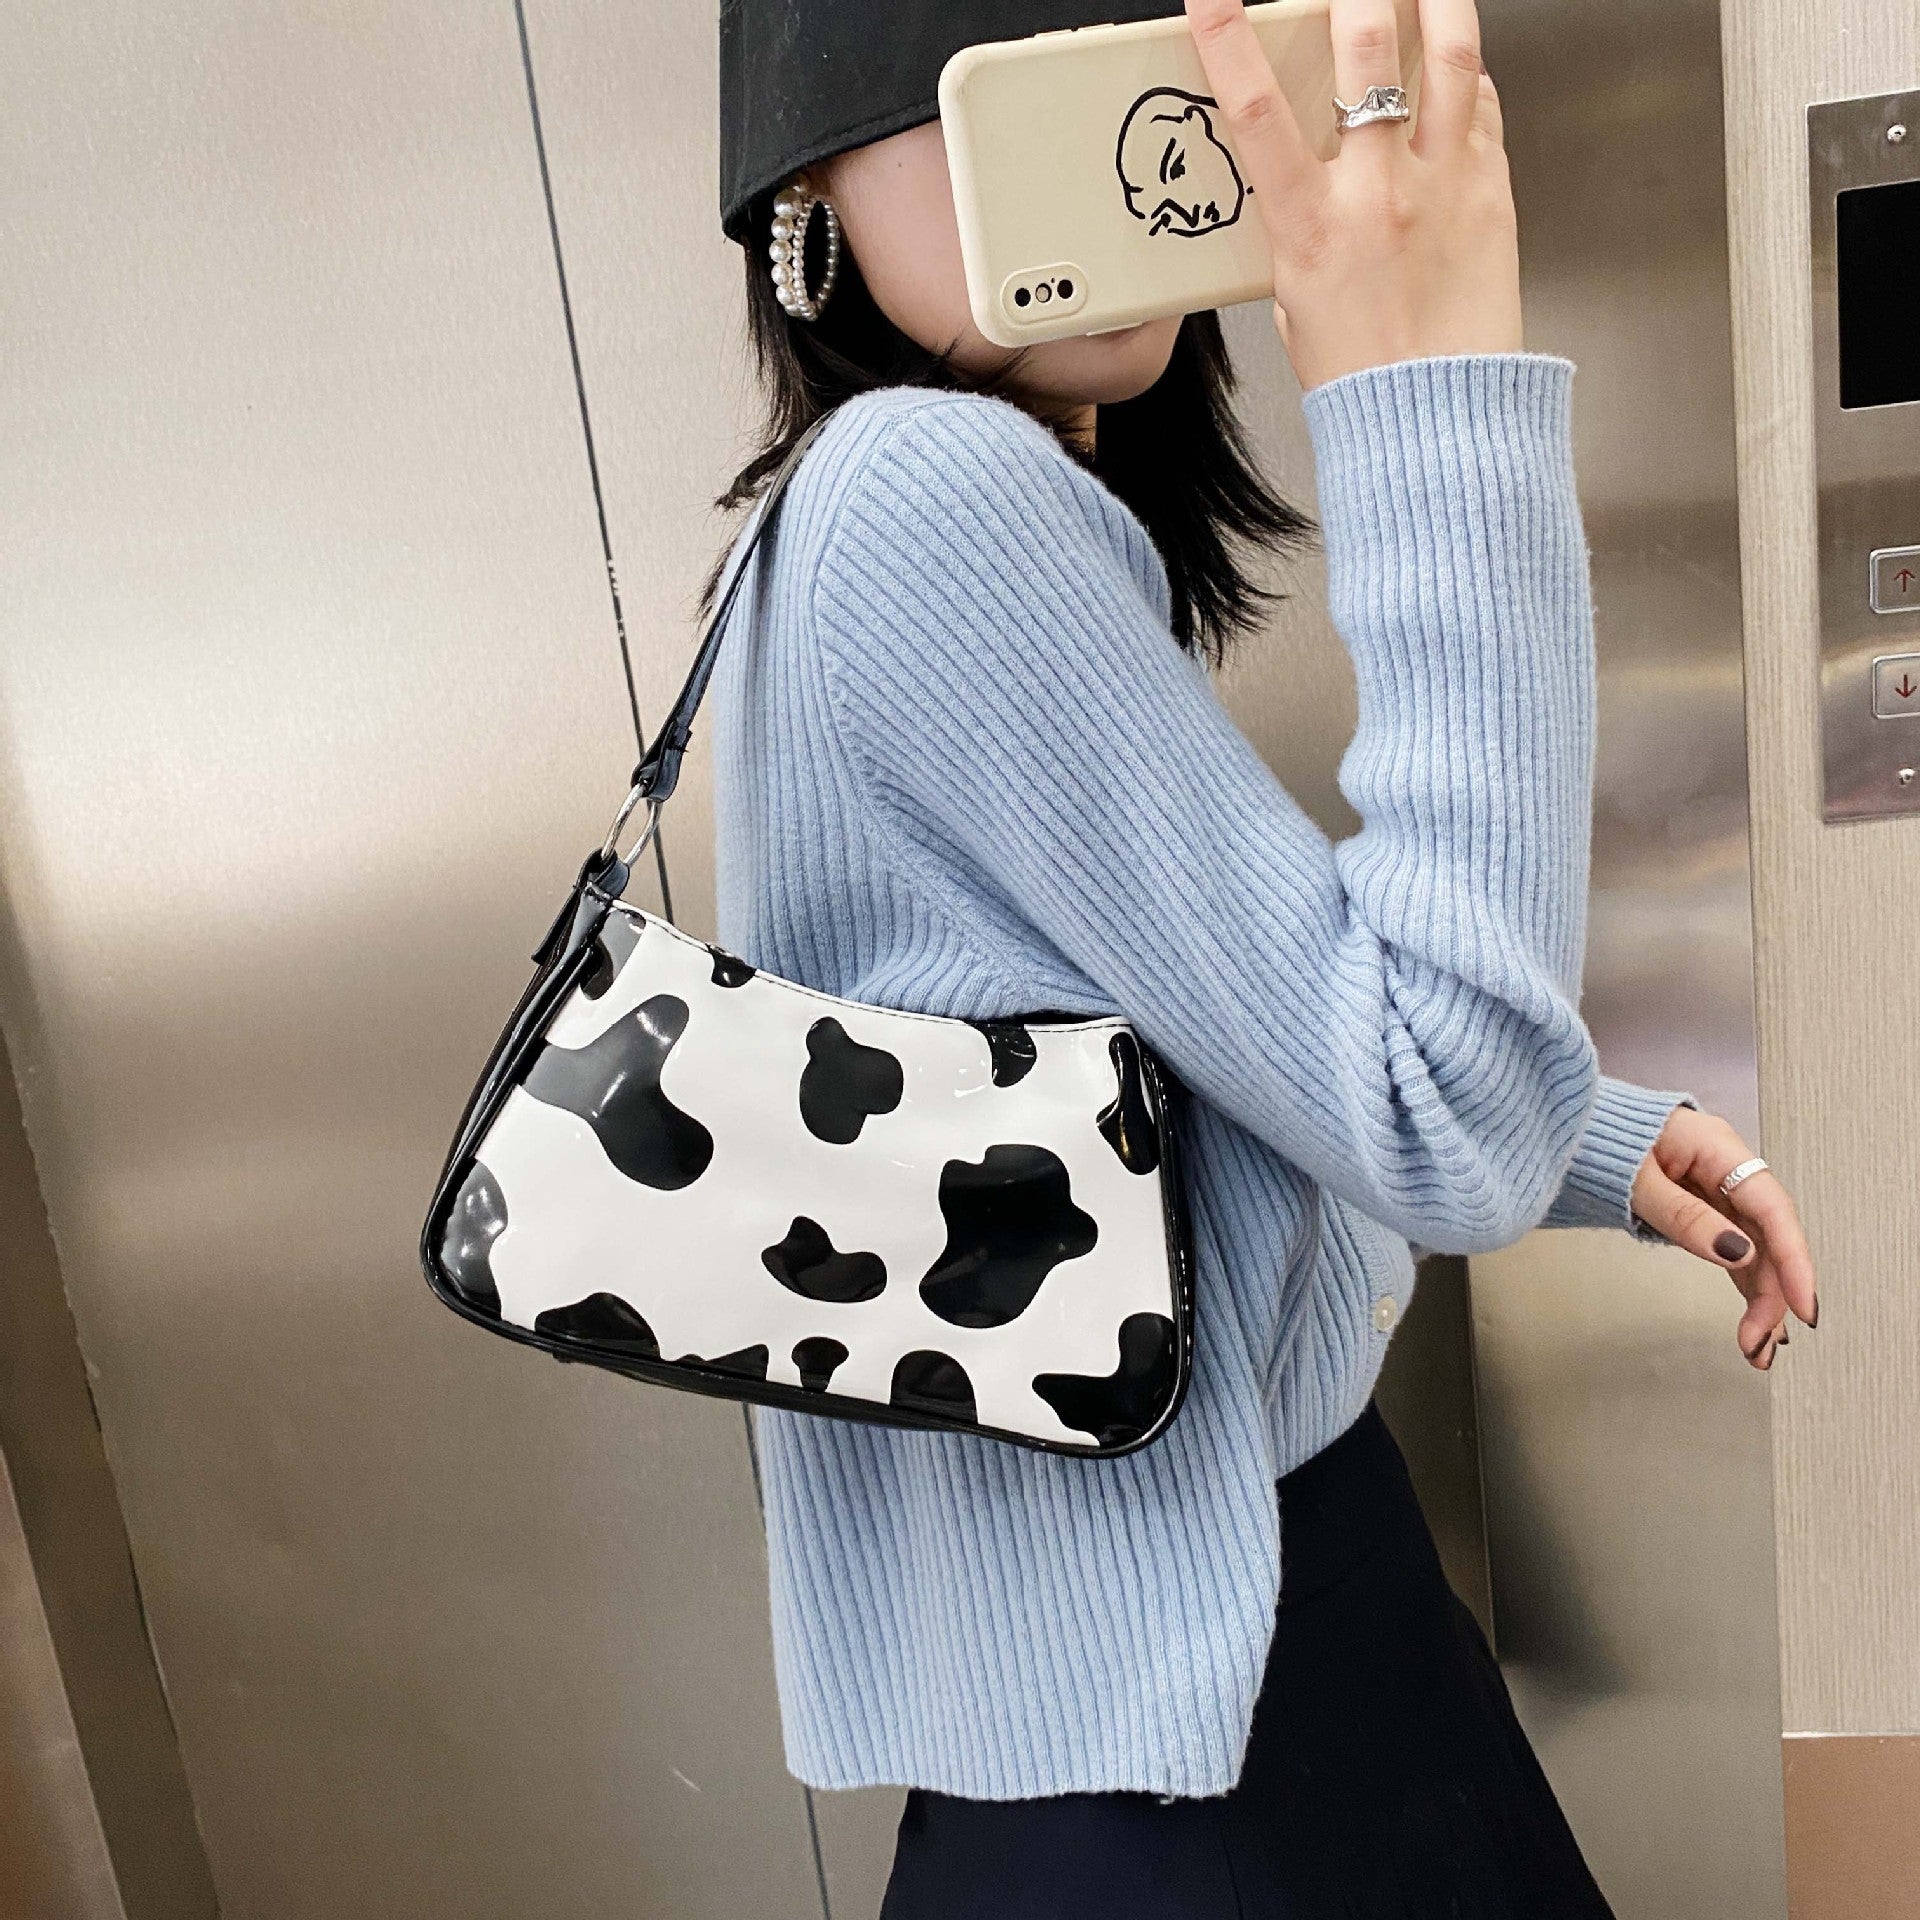 Popular purses are everywhere you look